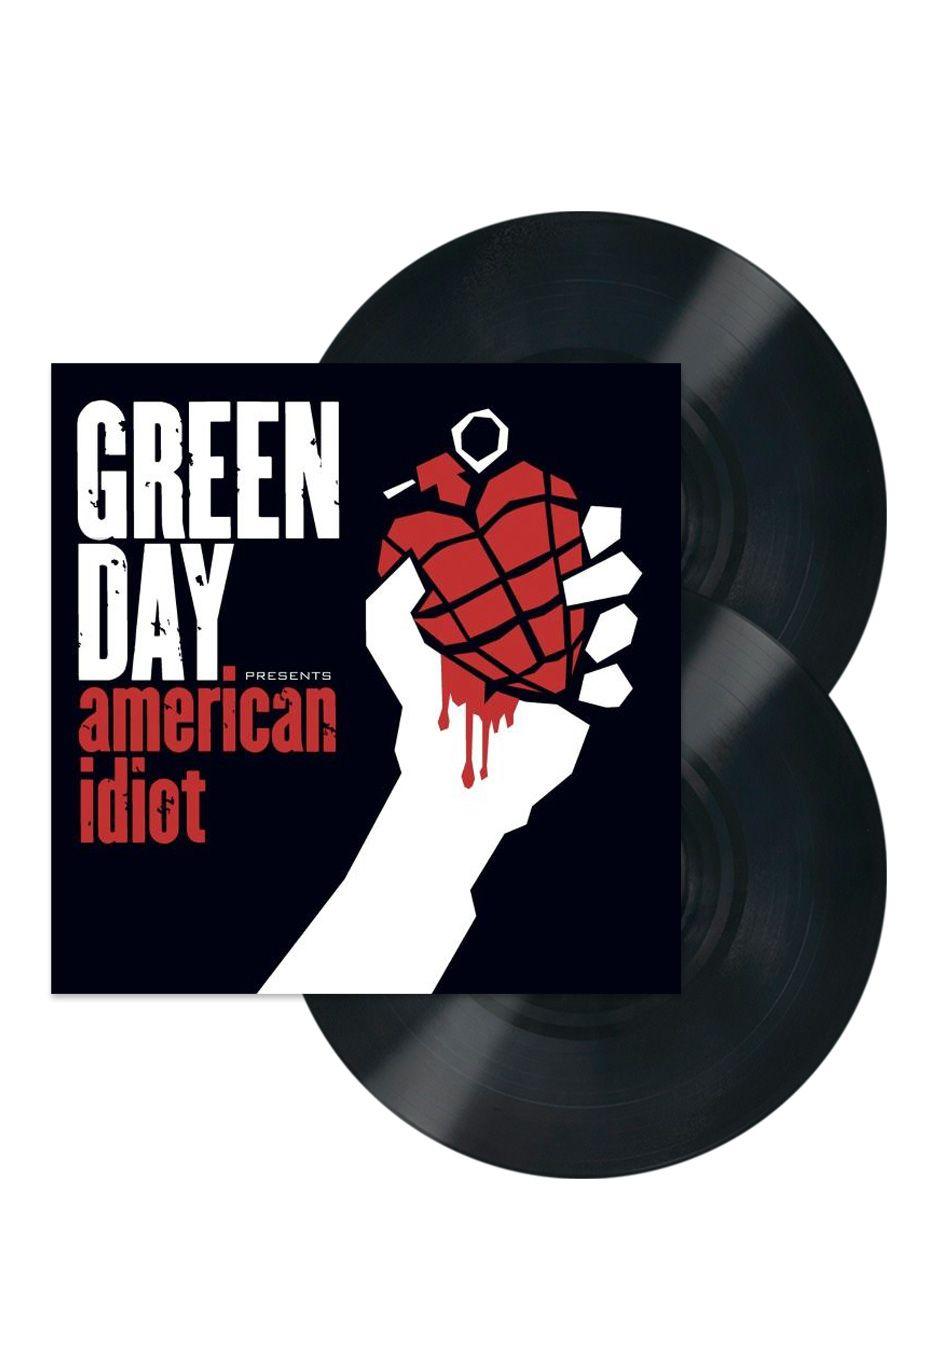 American Idiot Green Day Logo - Green Day - American Idiot - 2 LP - CDs, Vinyl and DVDs of your ...